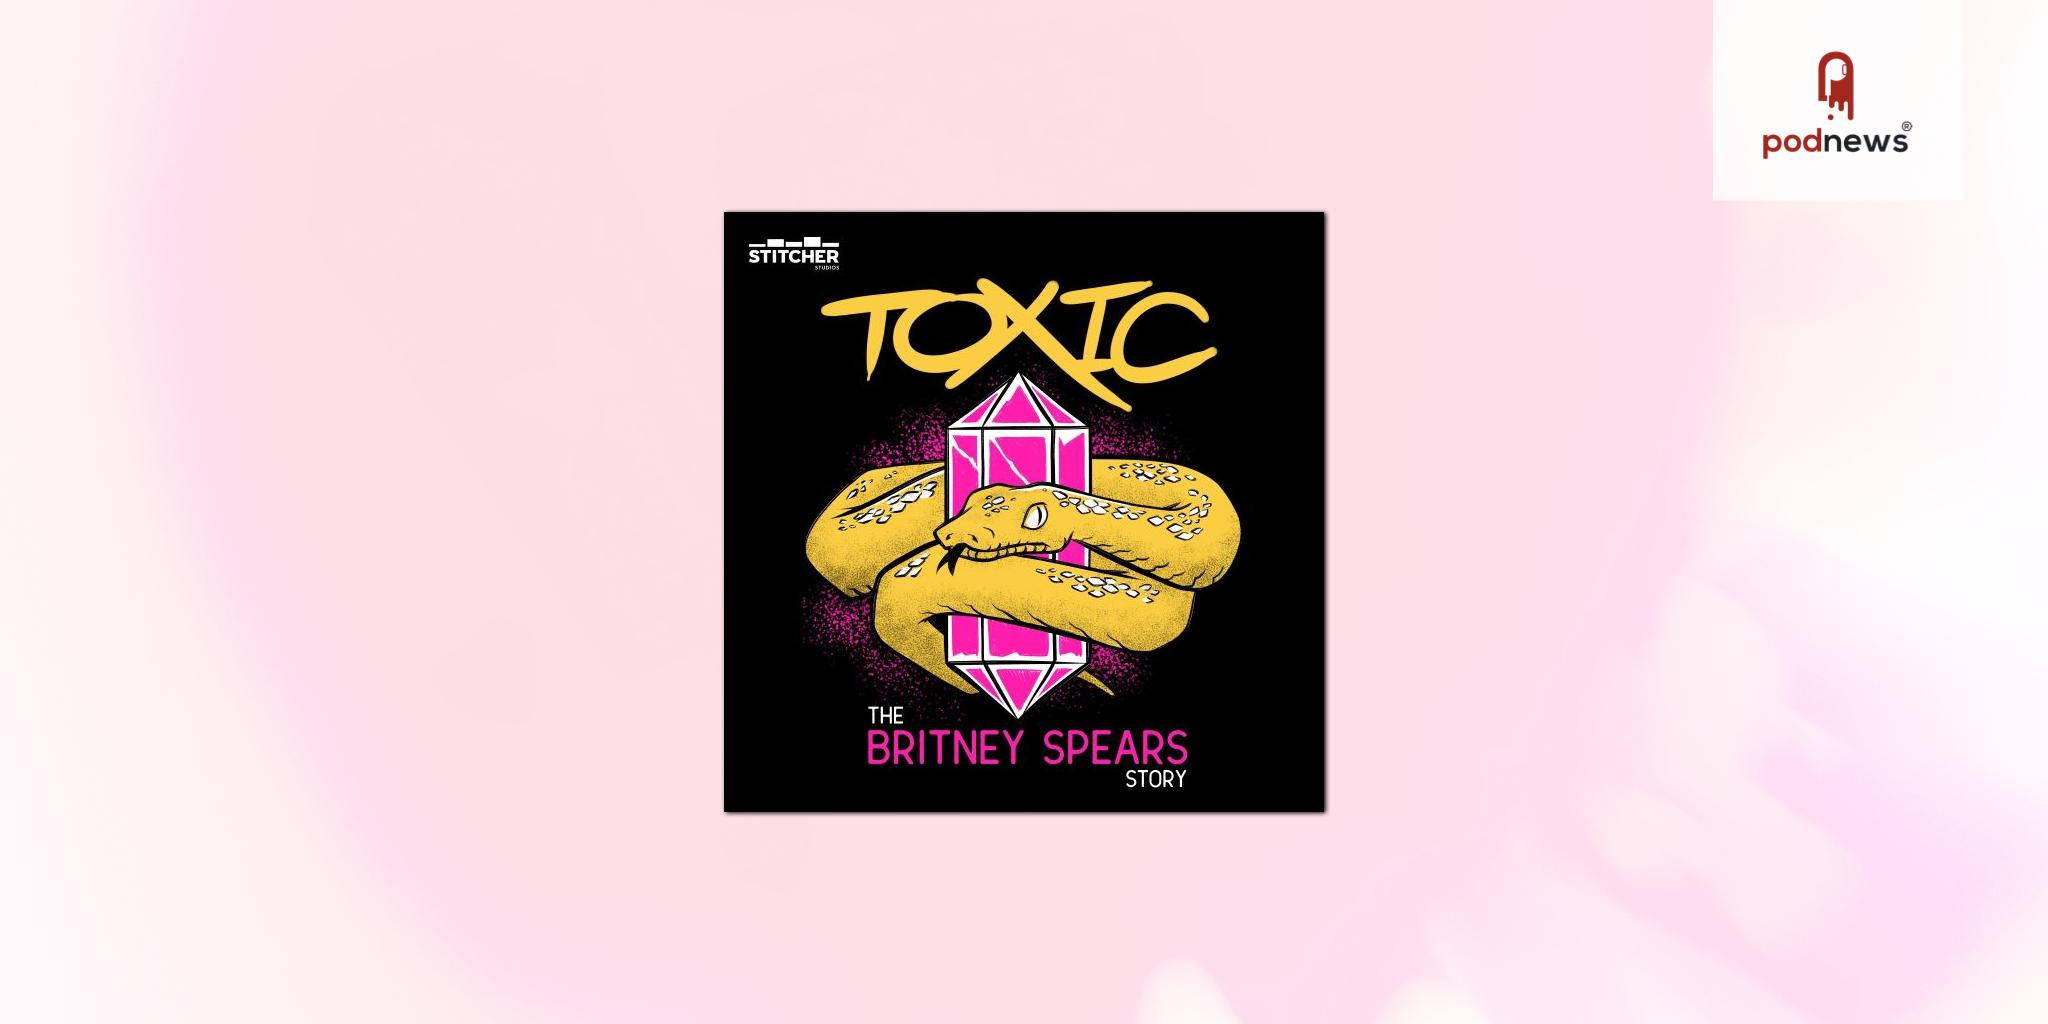 Witness Docs announces new investigative podcast Toxic: The Britney Spears Story, coming Jul 2021